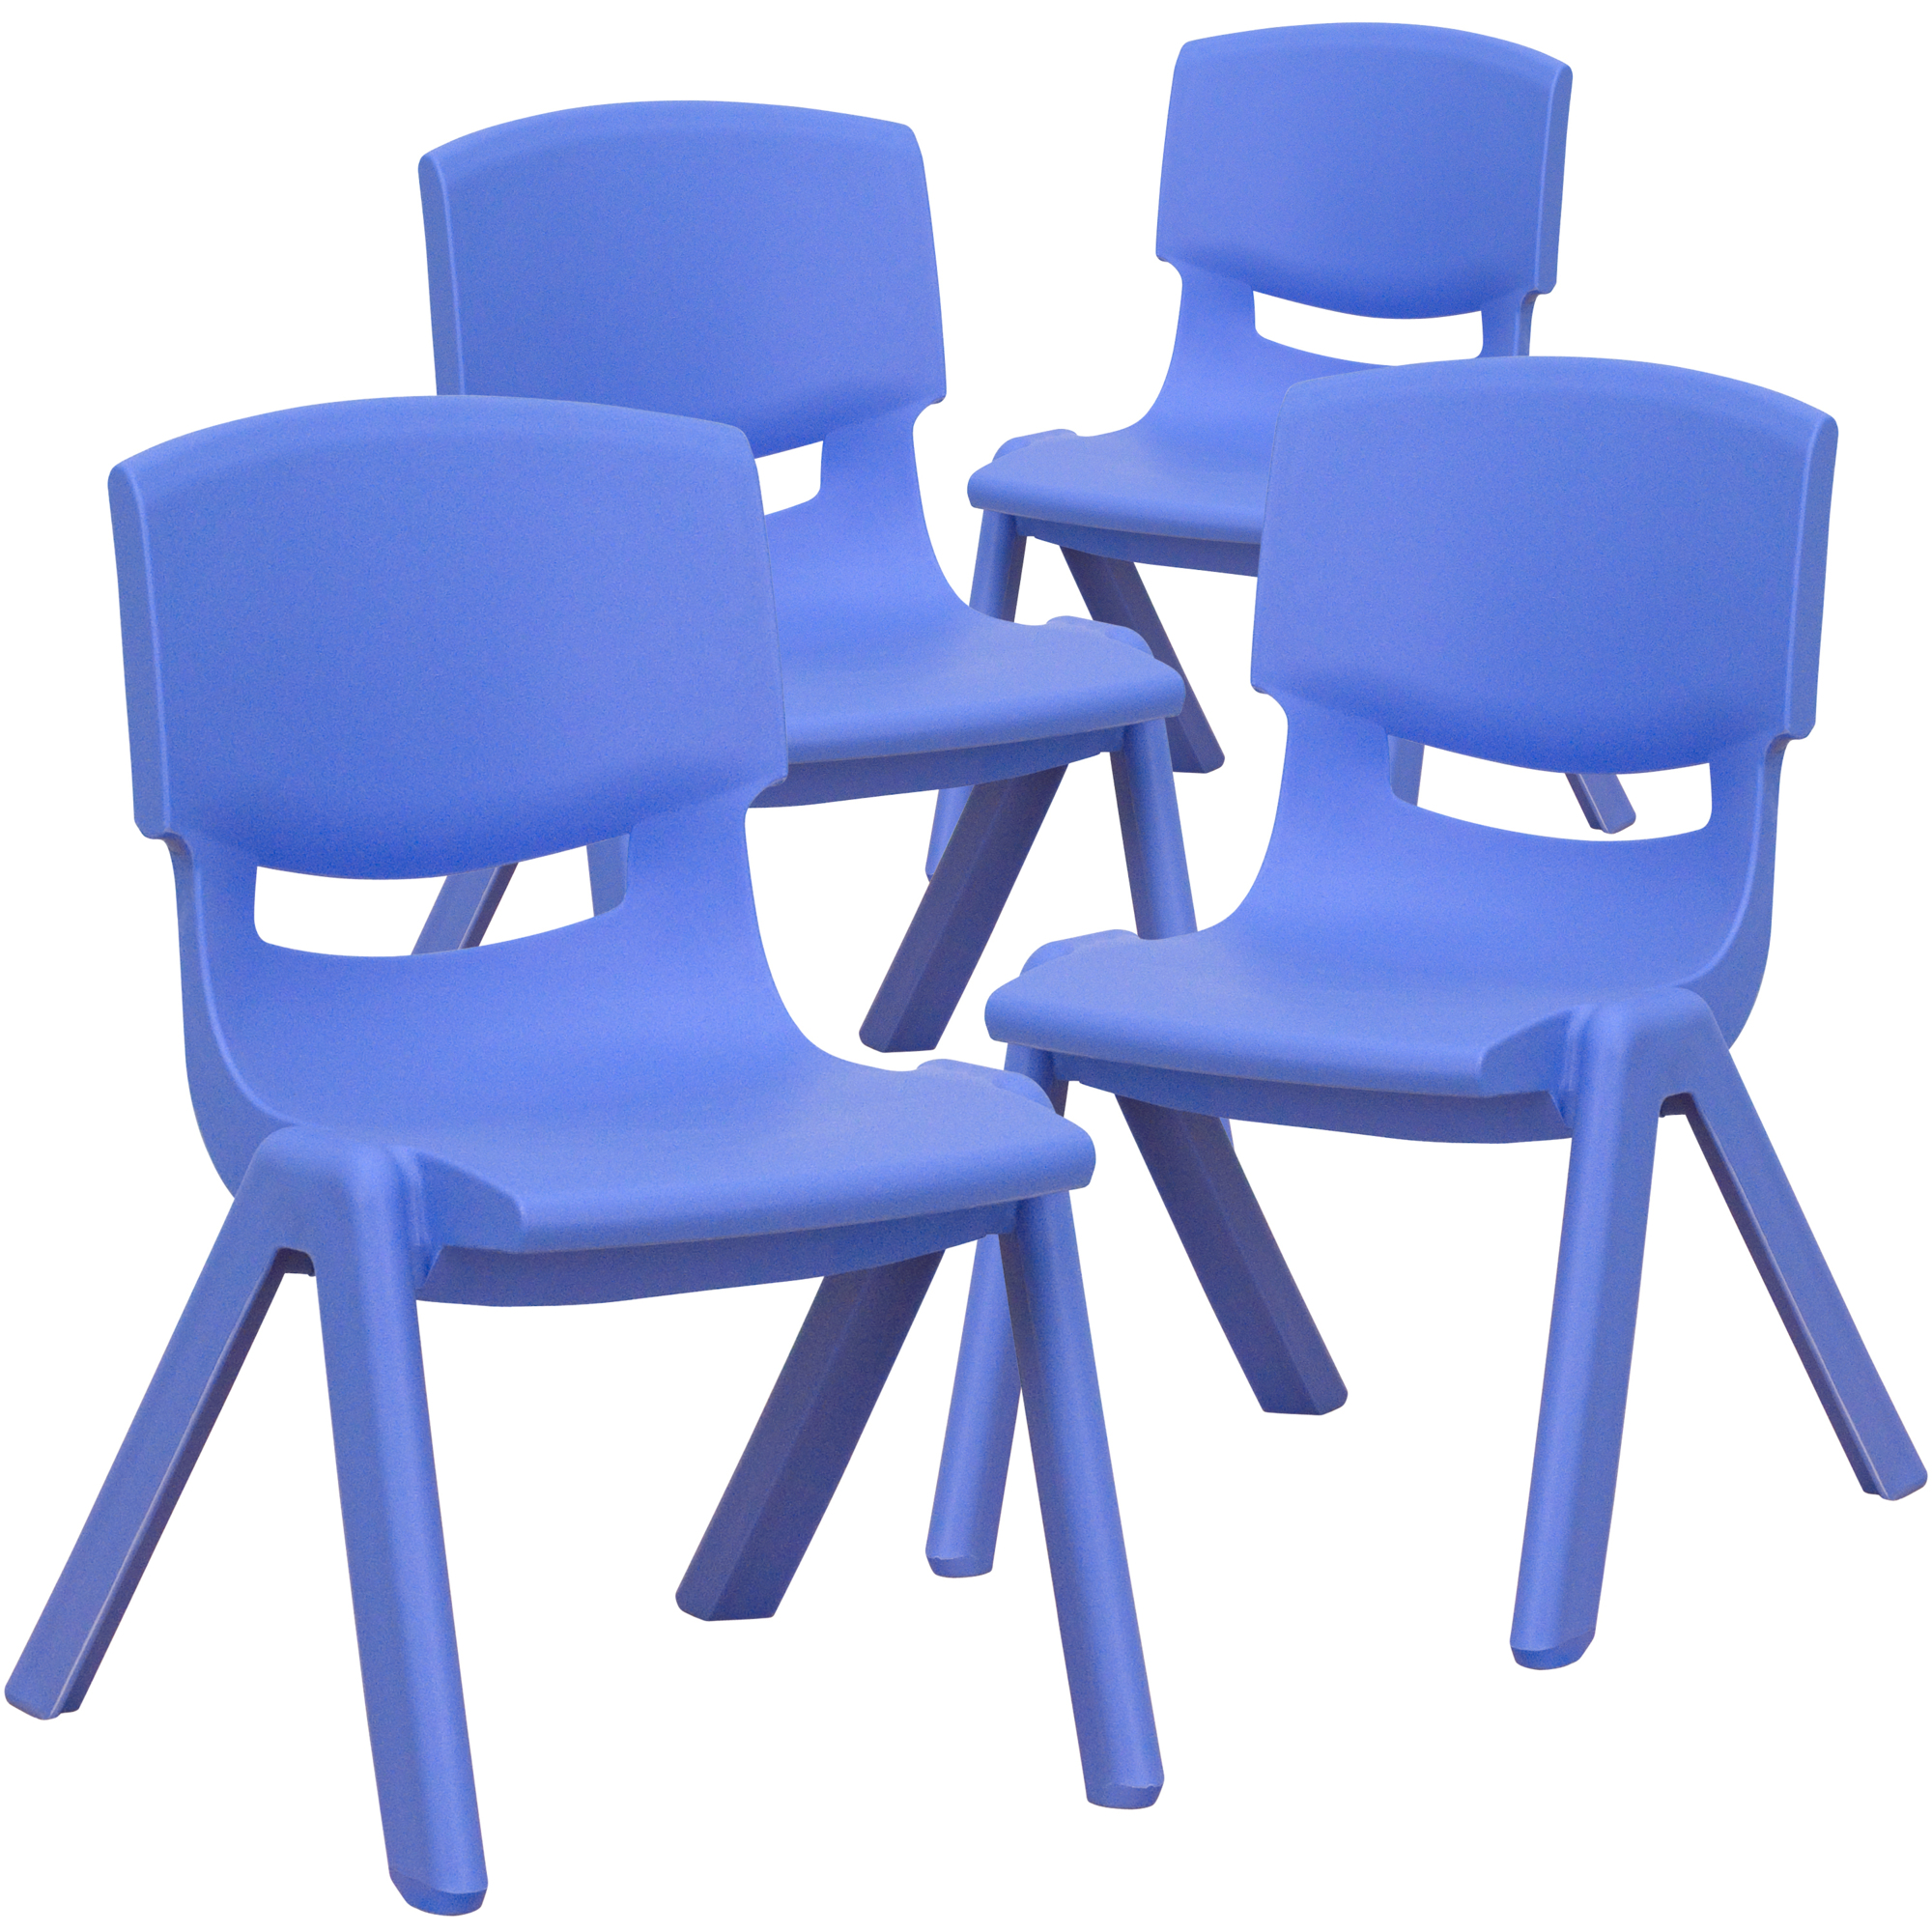 Flash Furniture, 4 Pack Blue Plastic School Chair-10.5Inch H Seat, Primary Color Blue, Included (qty.) 4, Model 4YUYCX4003BLUE